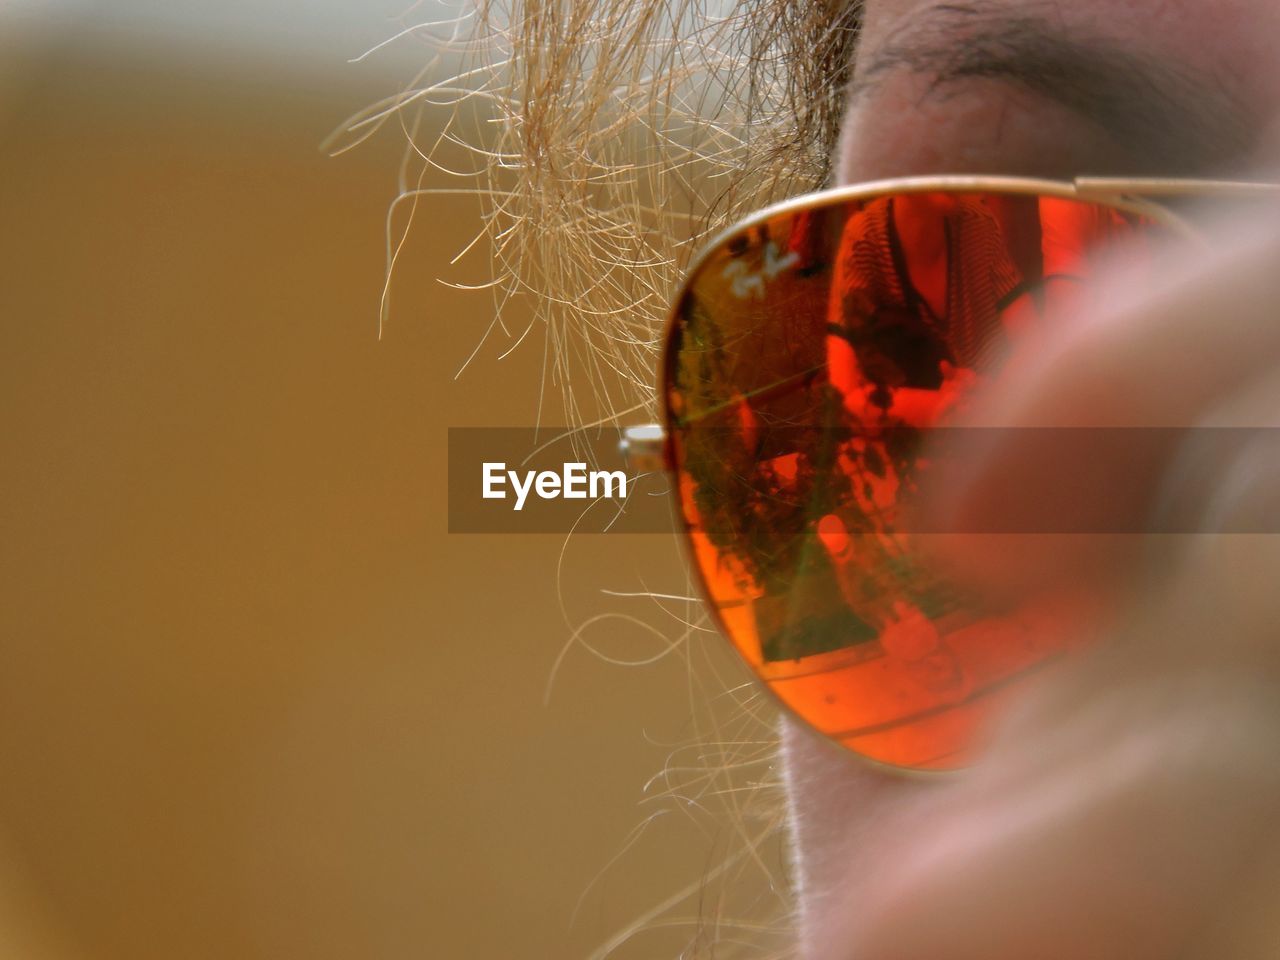 Cropped image of woman wearing sunglasses